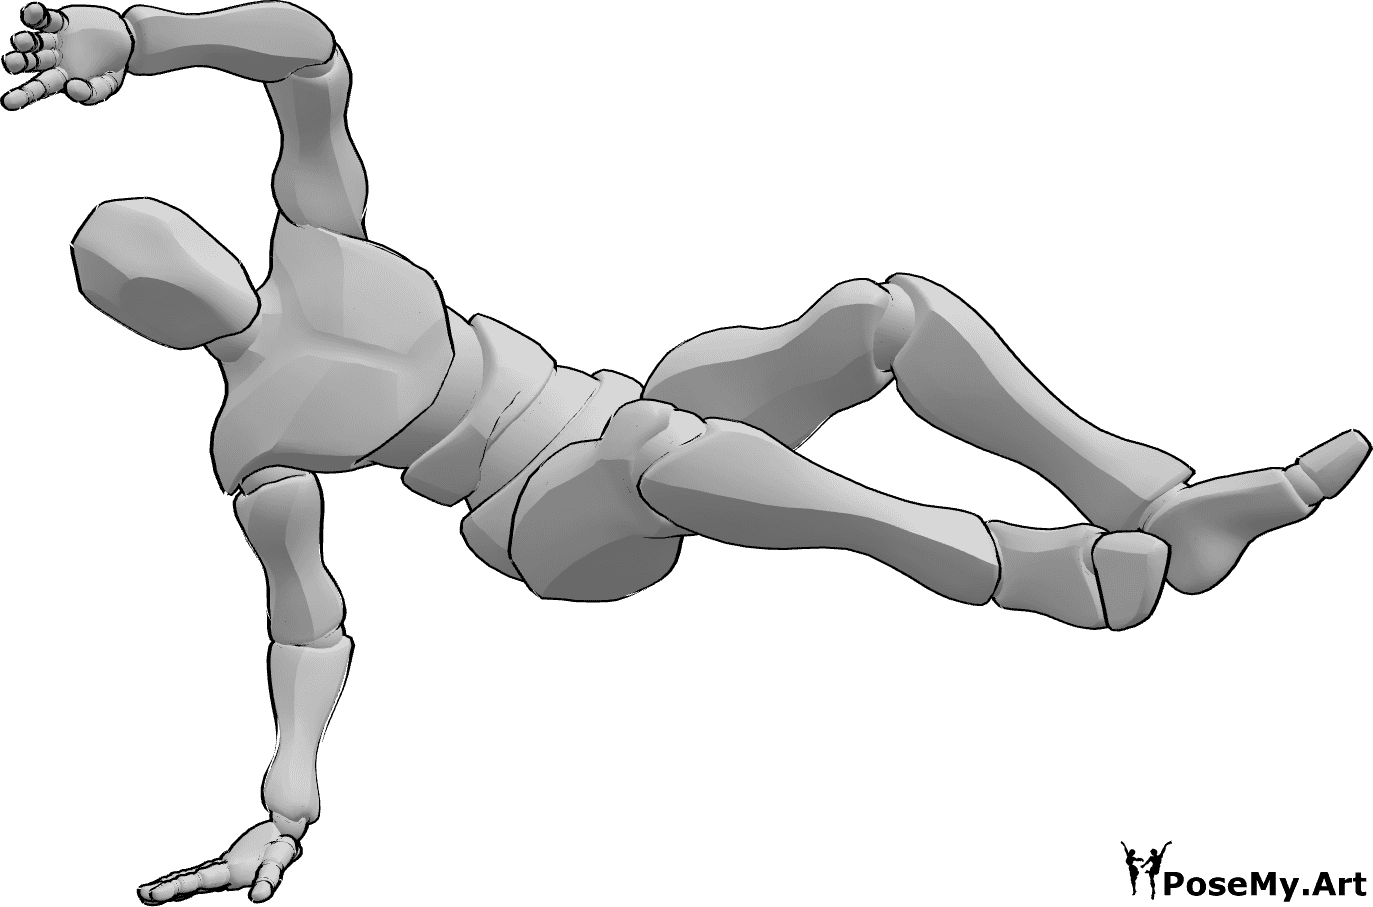 Pose Reference - Right handstand leg pose - Male is breakdancing on the floor, both legs are in the air, standing on right hand